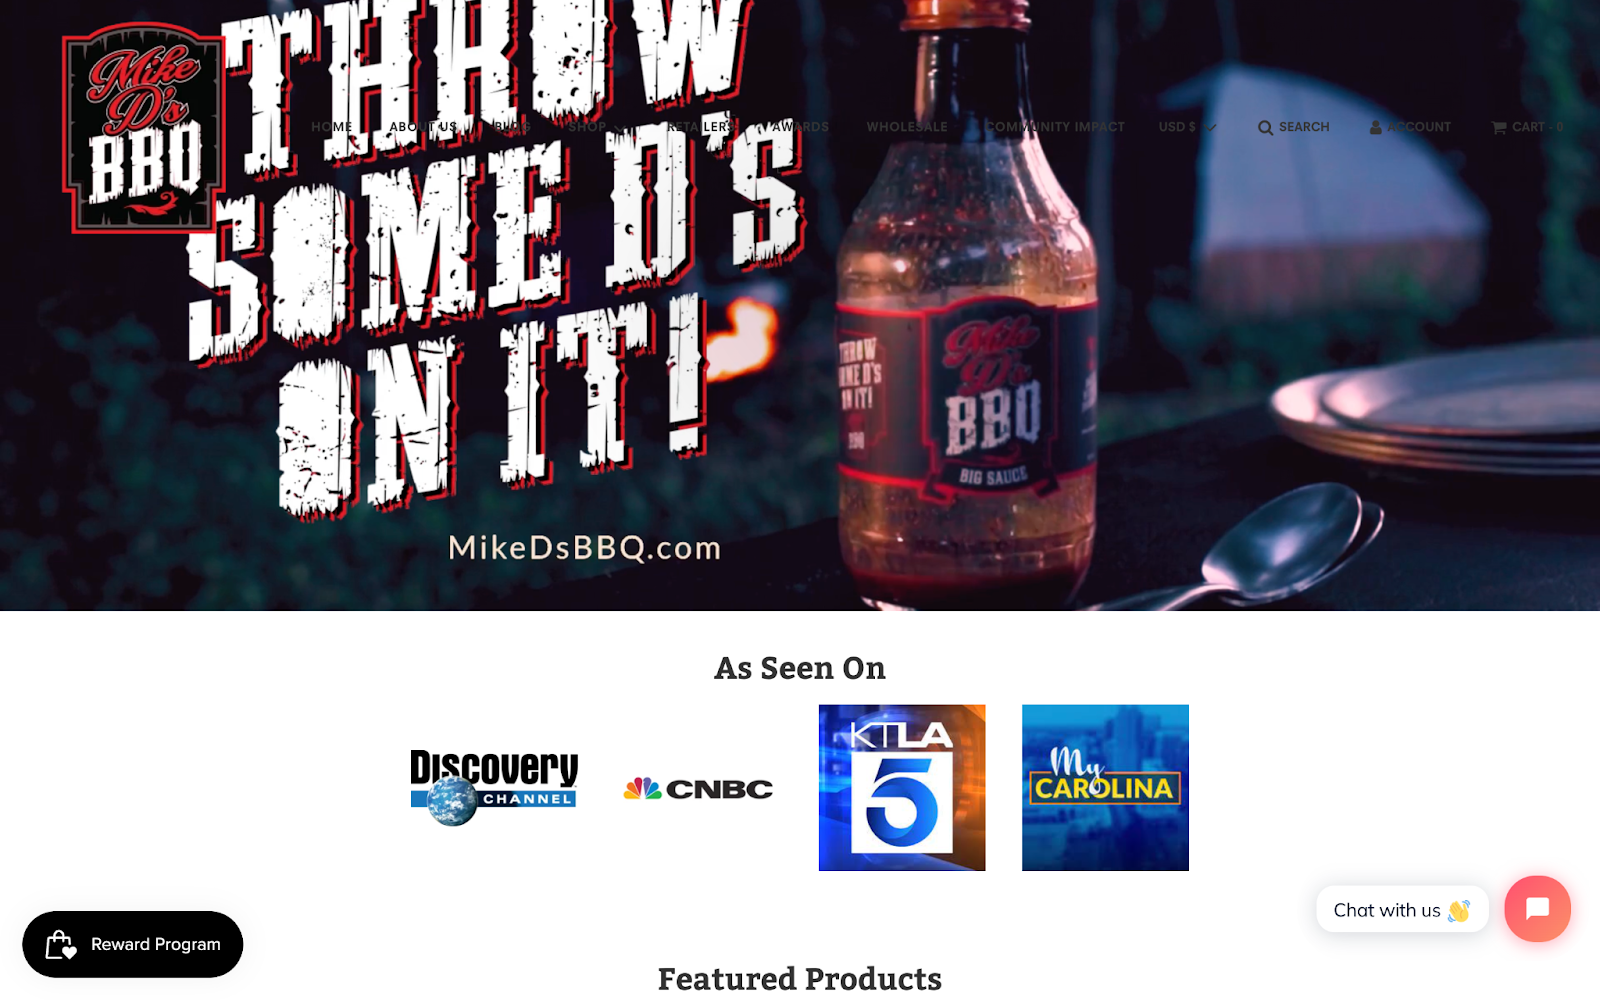 Support Black-owned businesses–A screenshot of Mike D’s BBQ’s homepage showing a bottle of their BBQ sauce that reads “Throw Some D’s On It! MikeDsBBQ.com”.